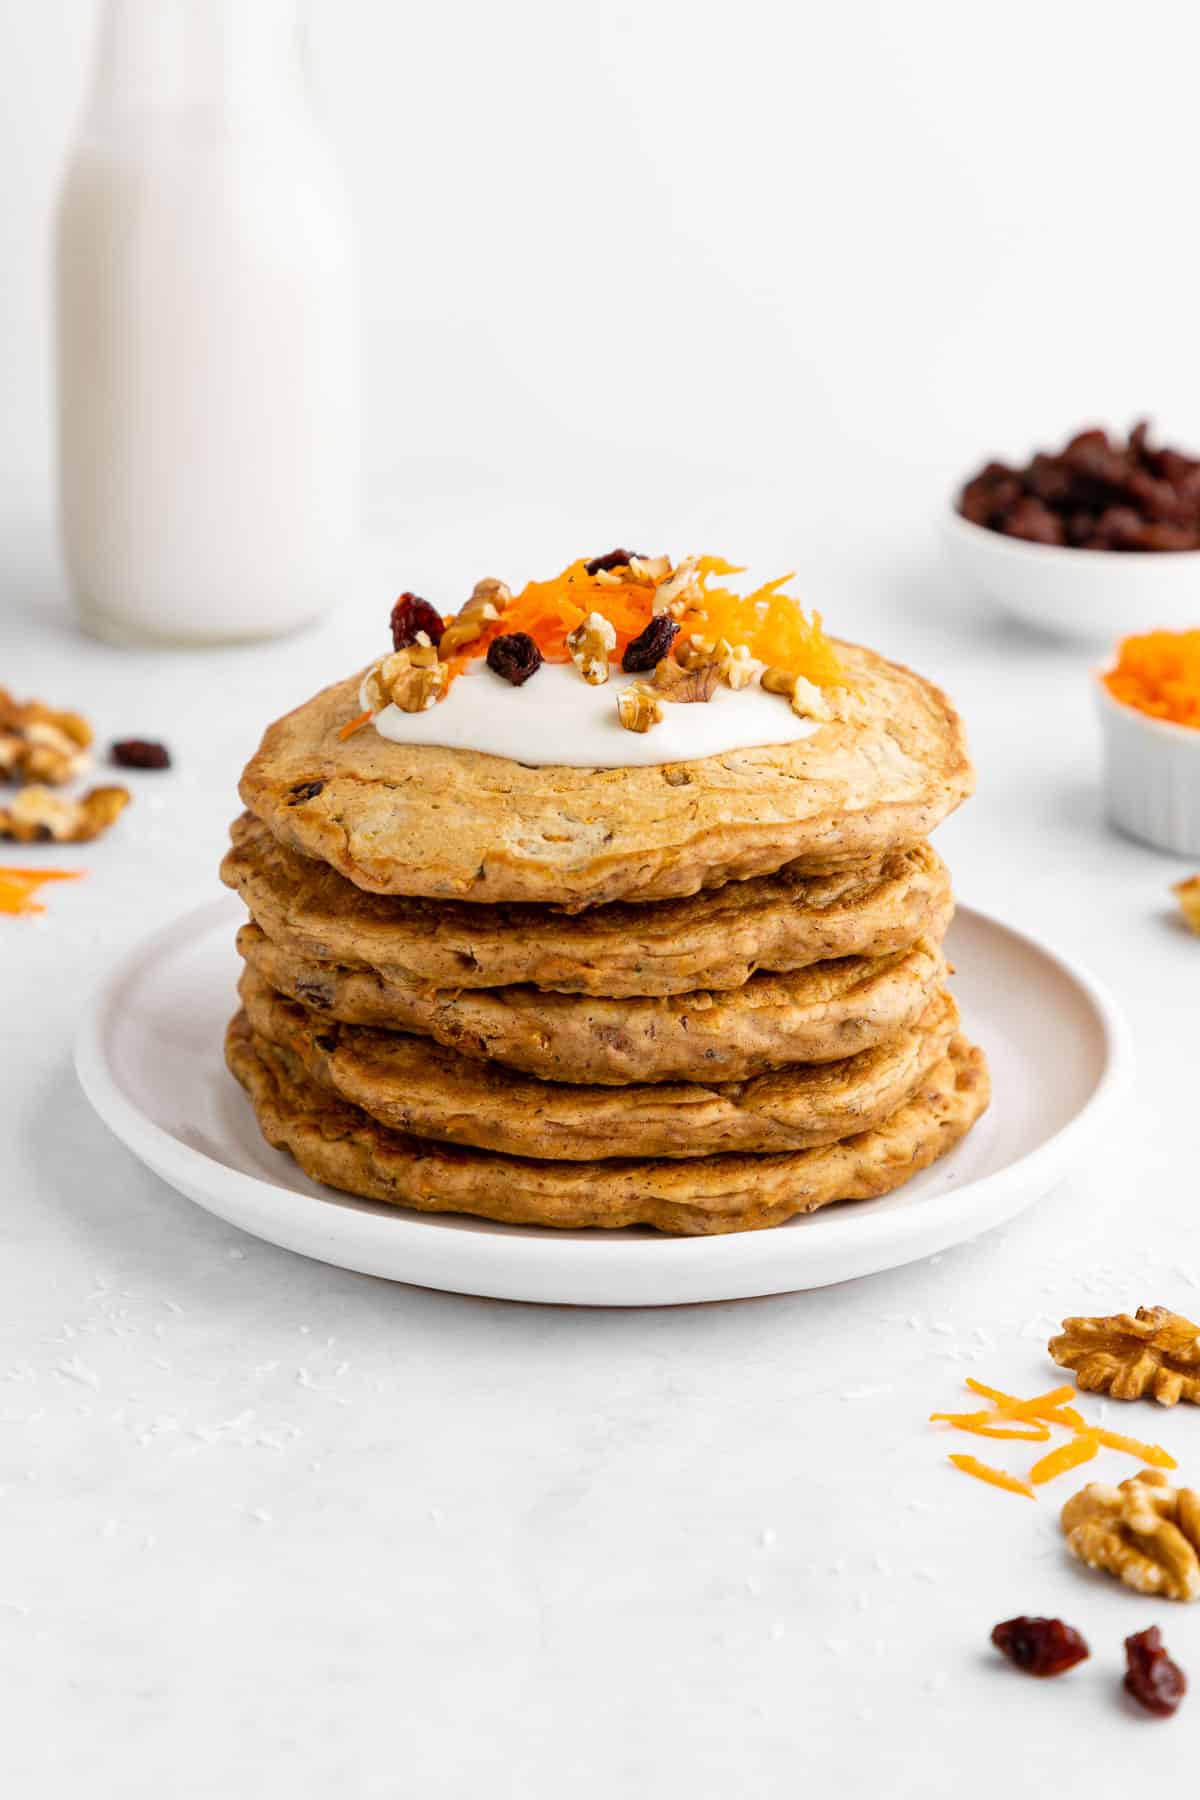 a stack of vegan carrot cake pancakes with cream cheese icing, raisins, and walnuts